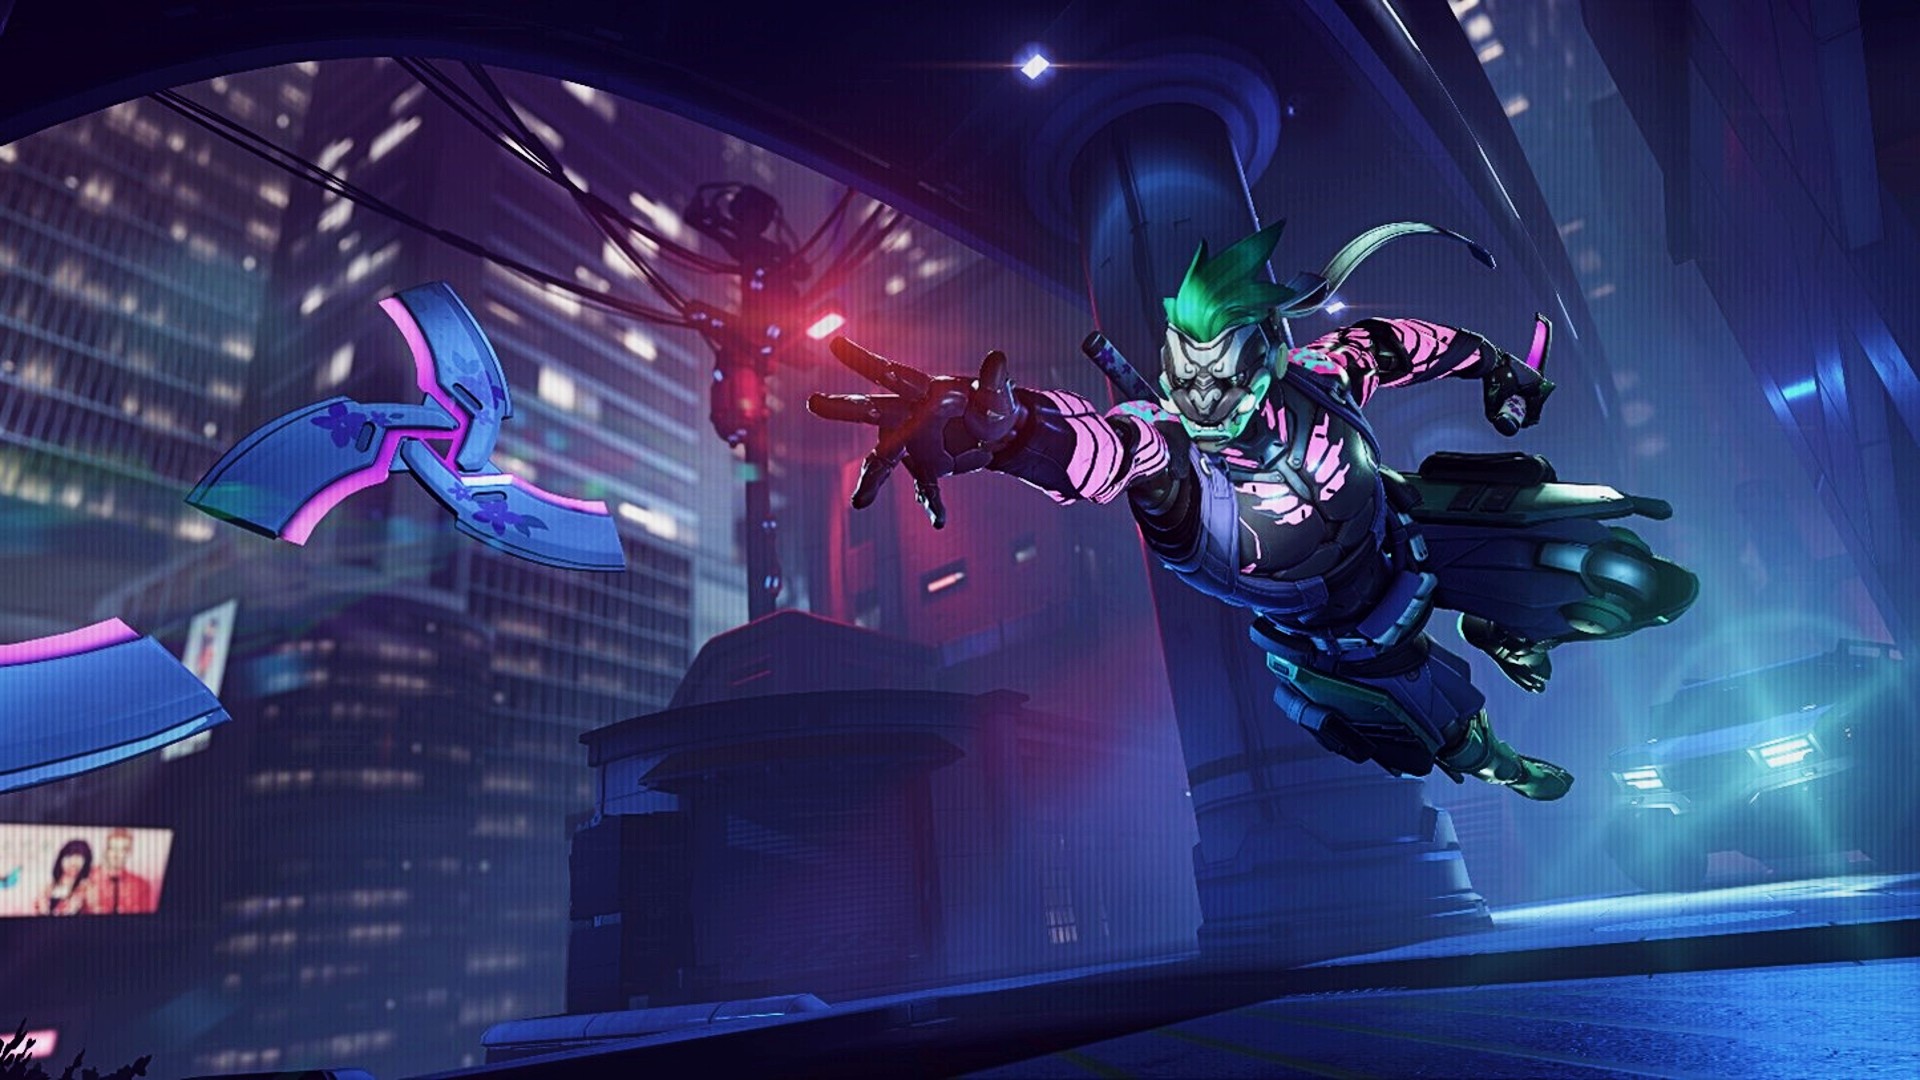 Genji shows off his mythic skin by throwing his suriken at the camera while in a cyberpunk city